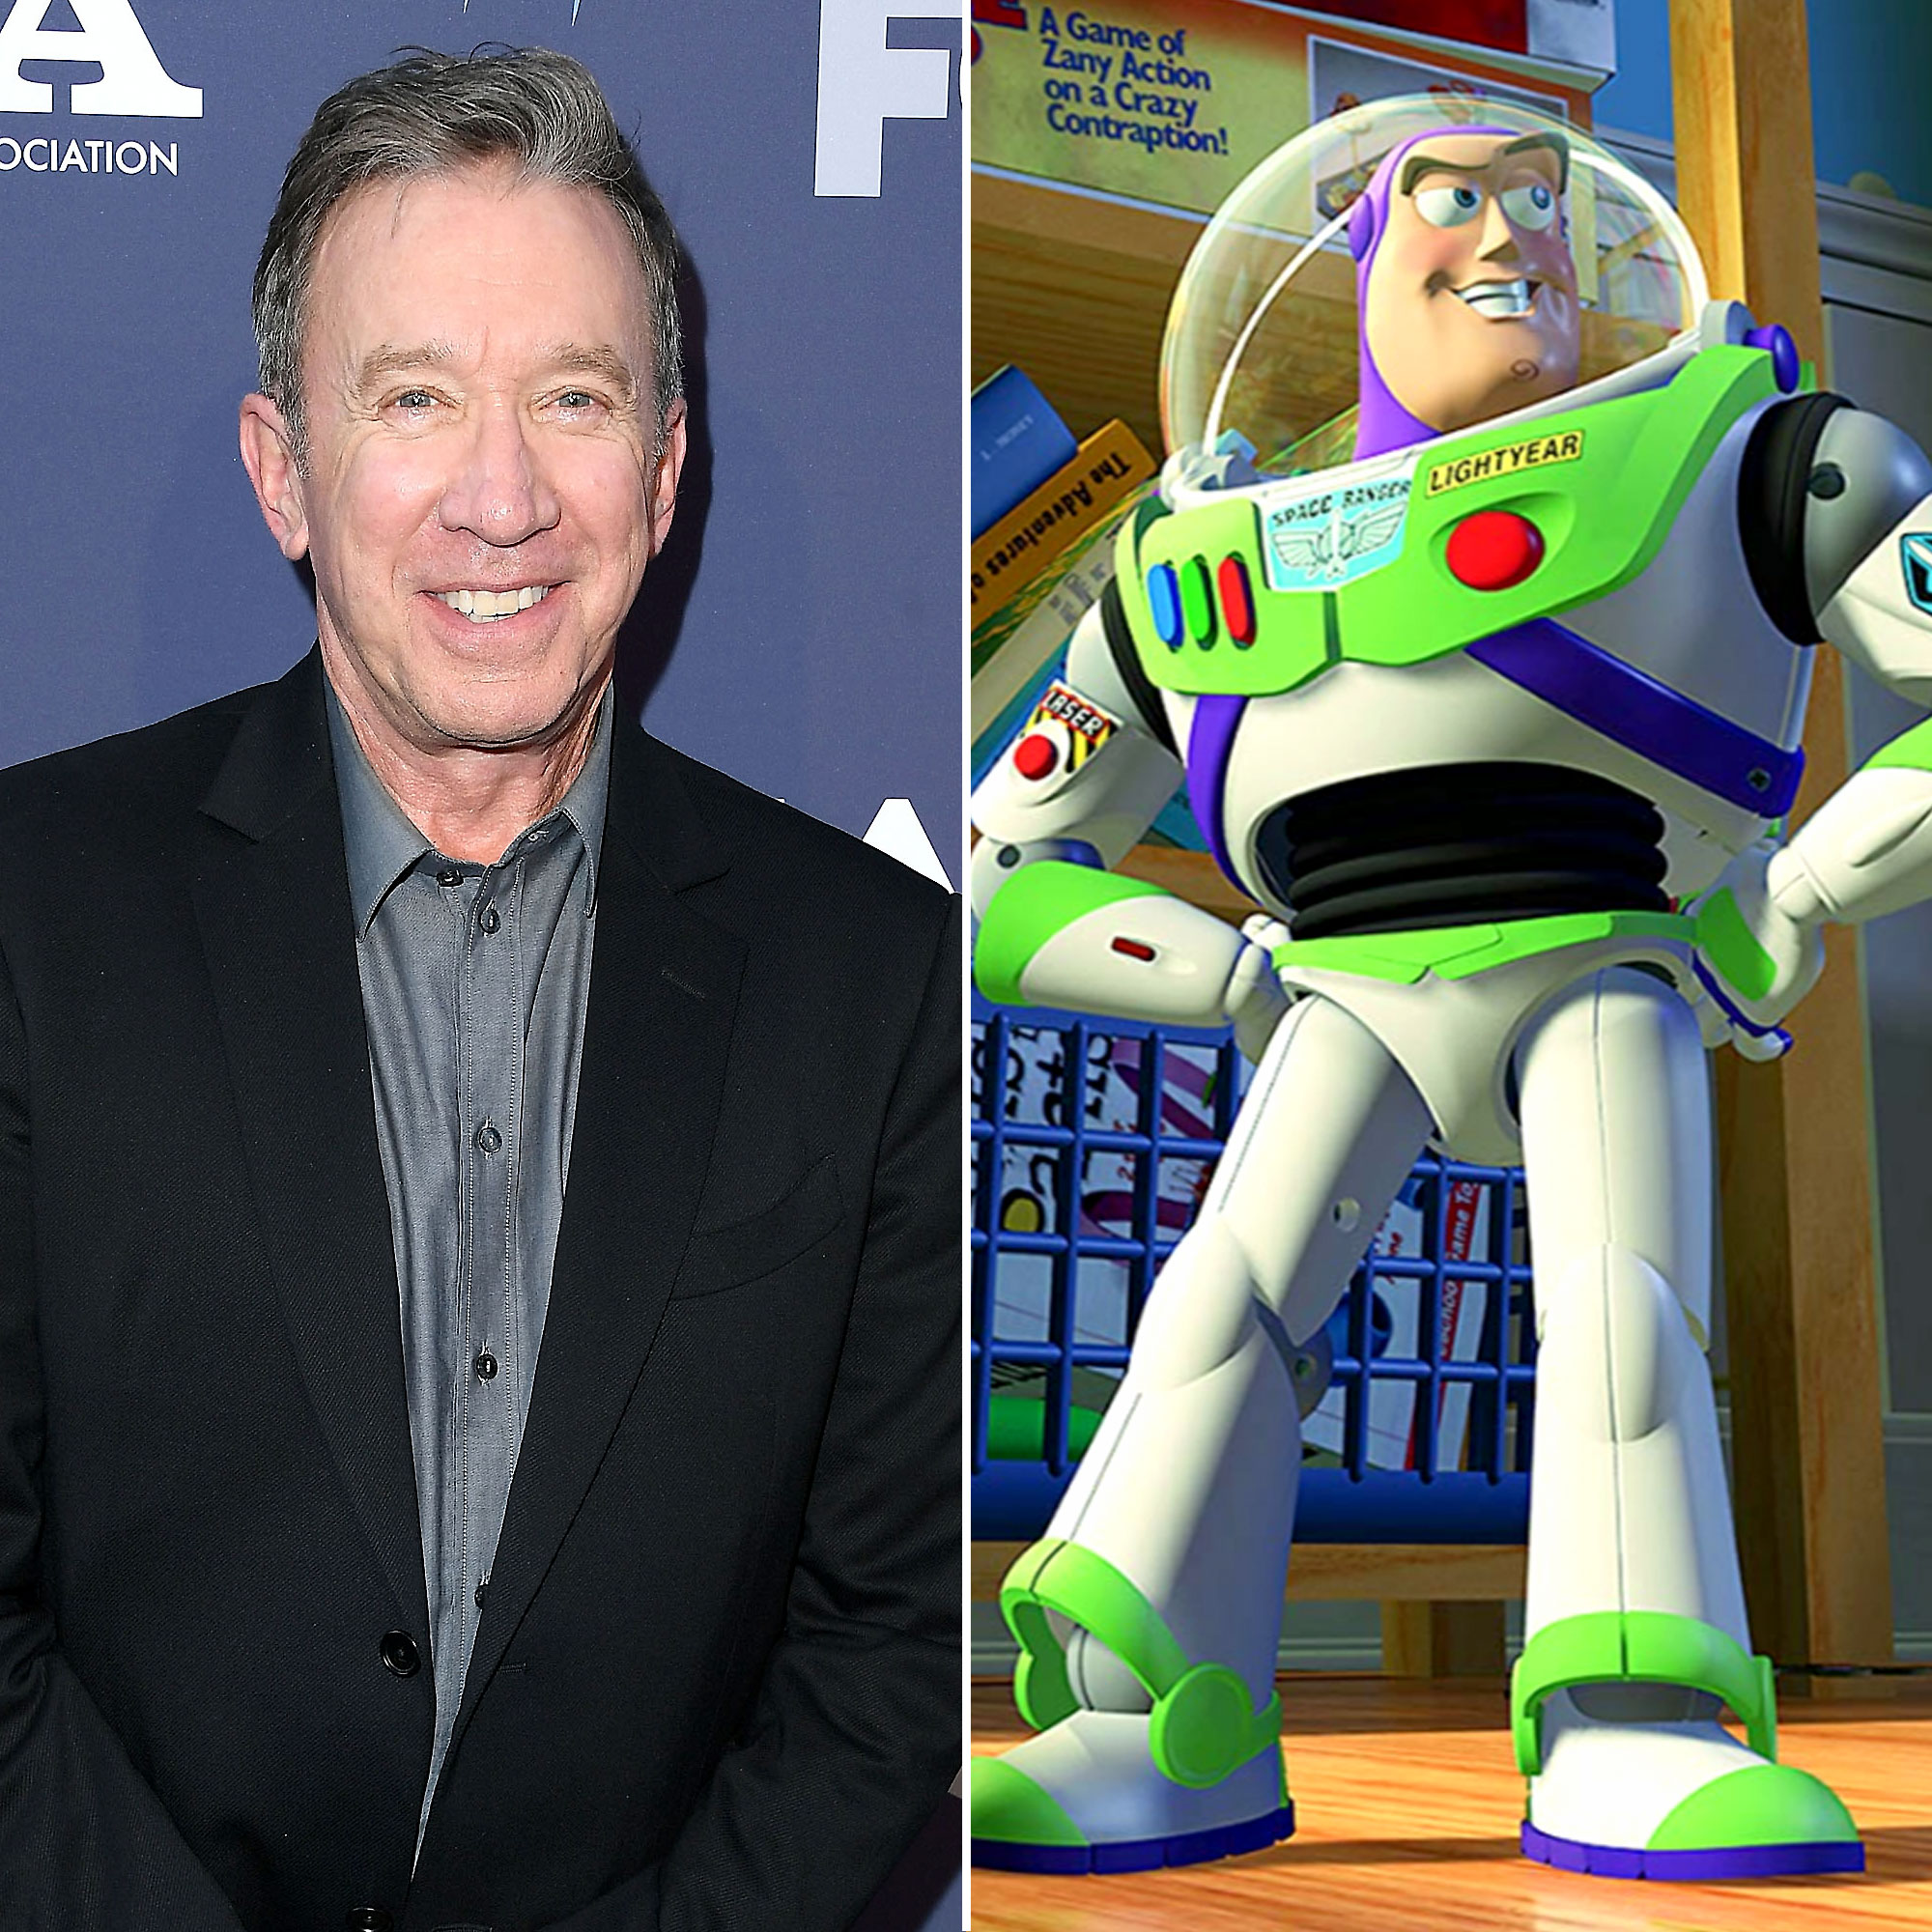 Toy Story 4' adds young Marvel star to its voice cast